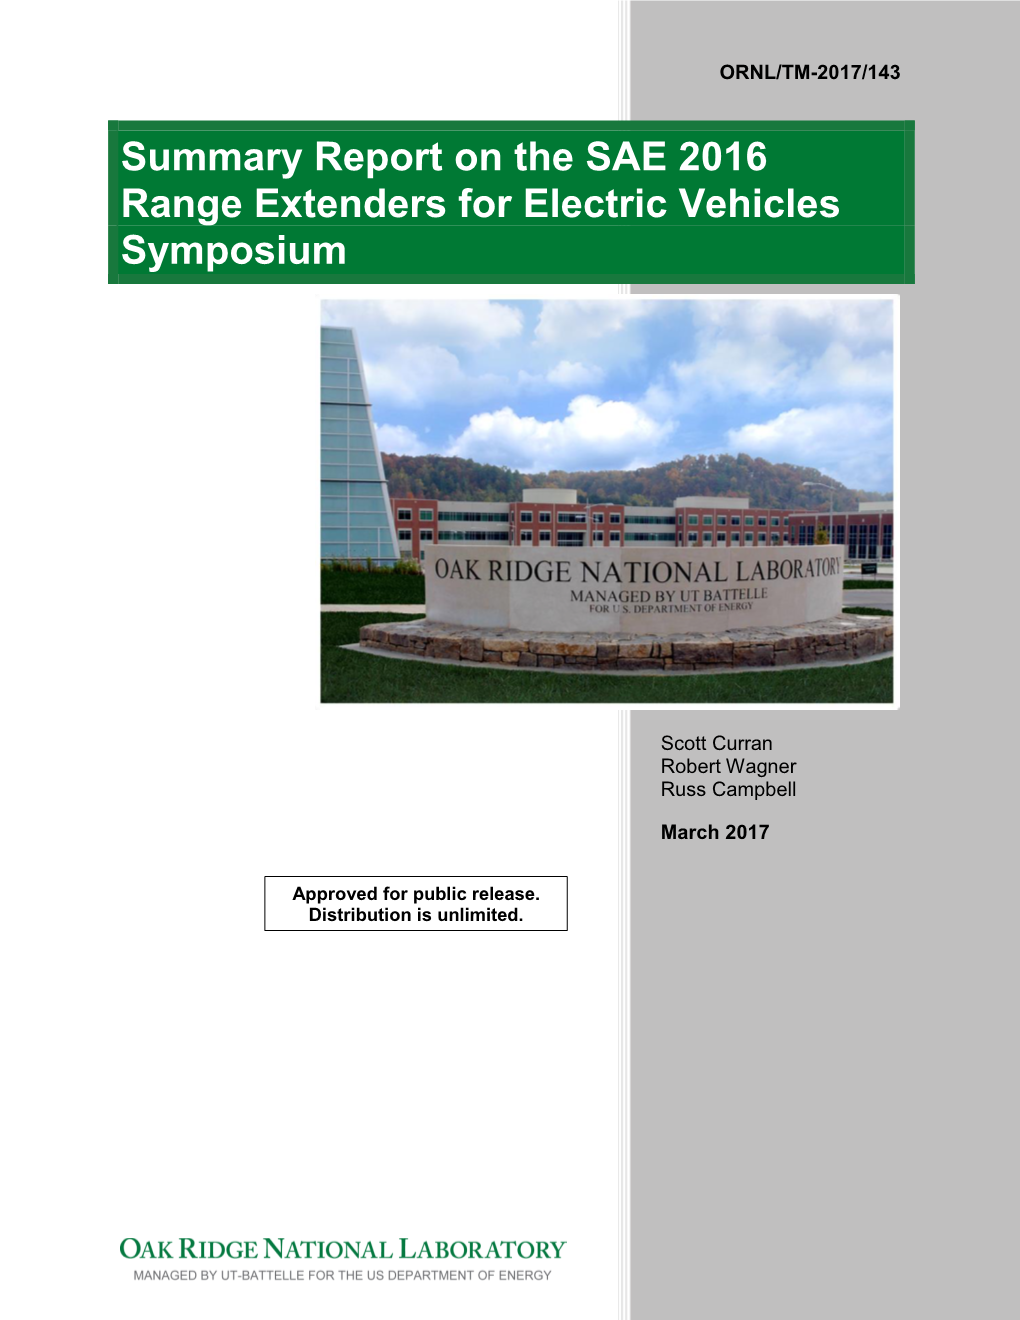 Summary Report on the SAE 2016 Range Extenders for Electric Vehicles Symposium